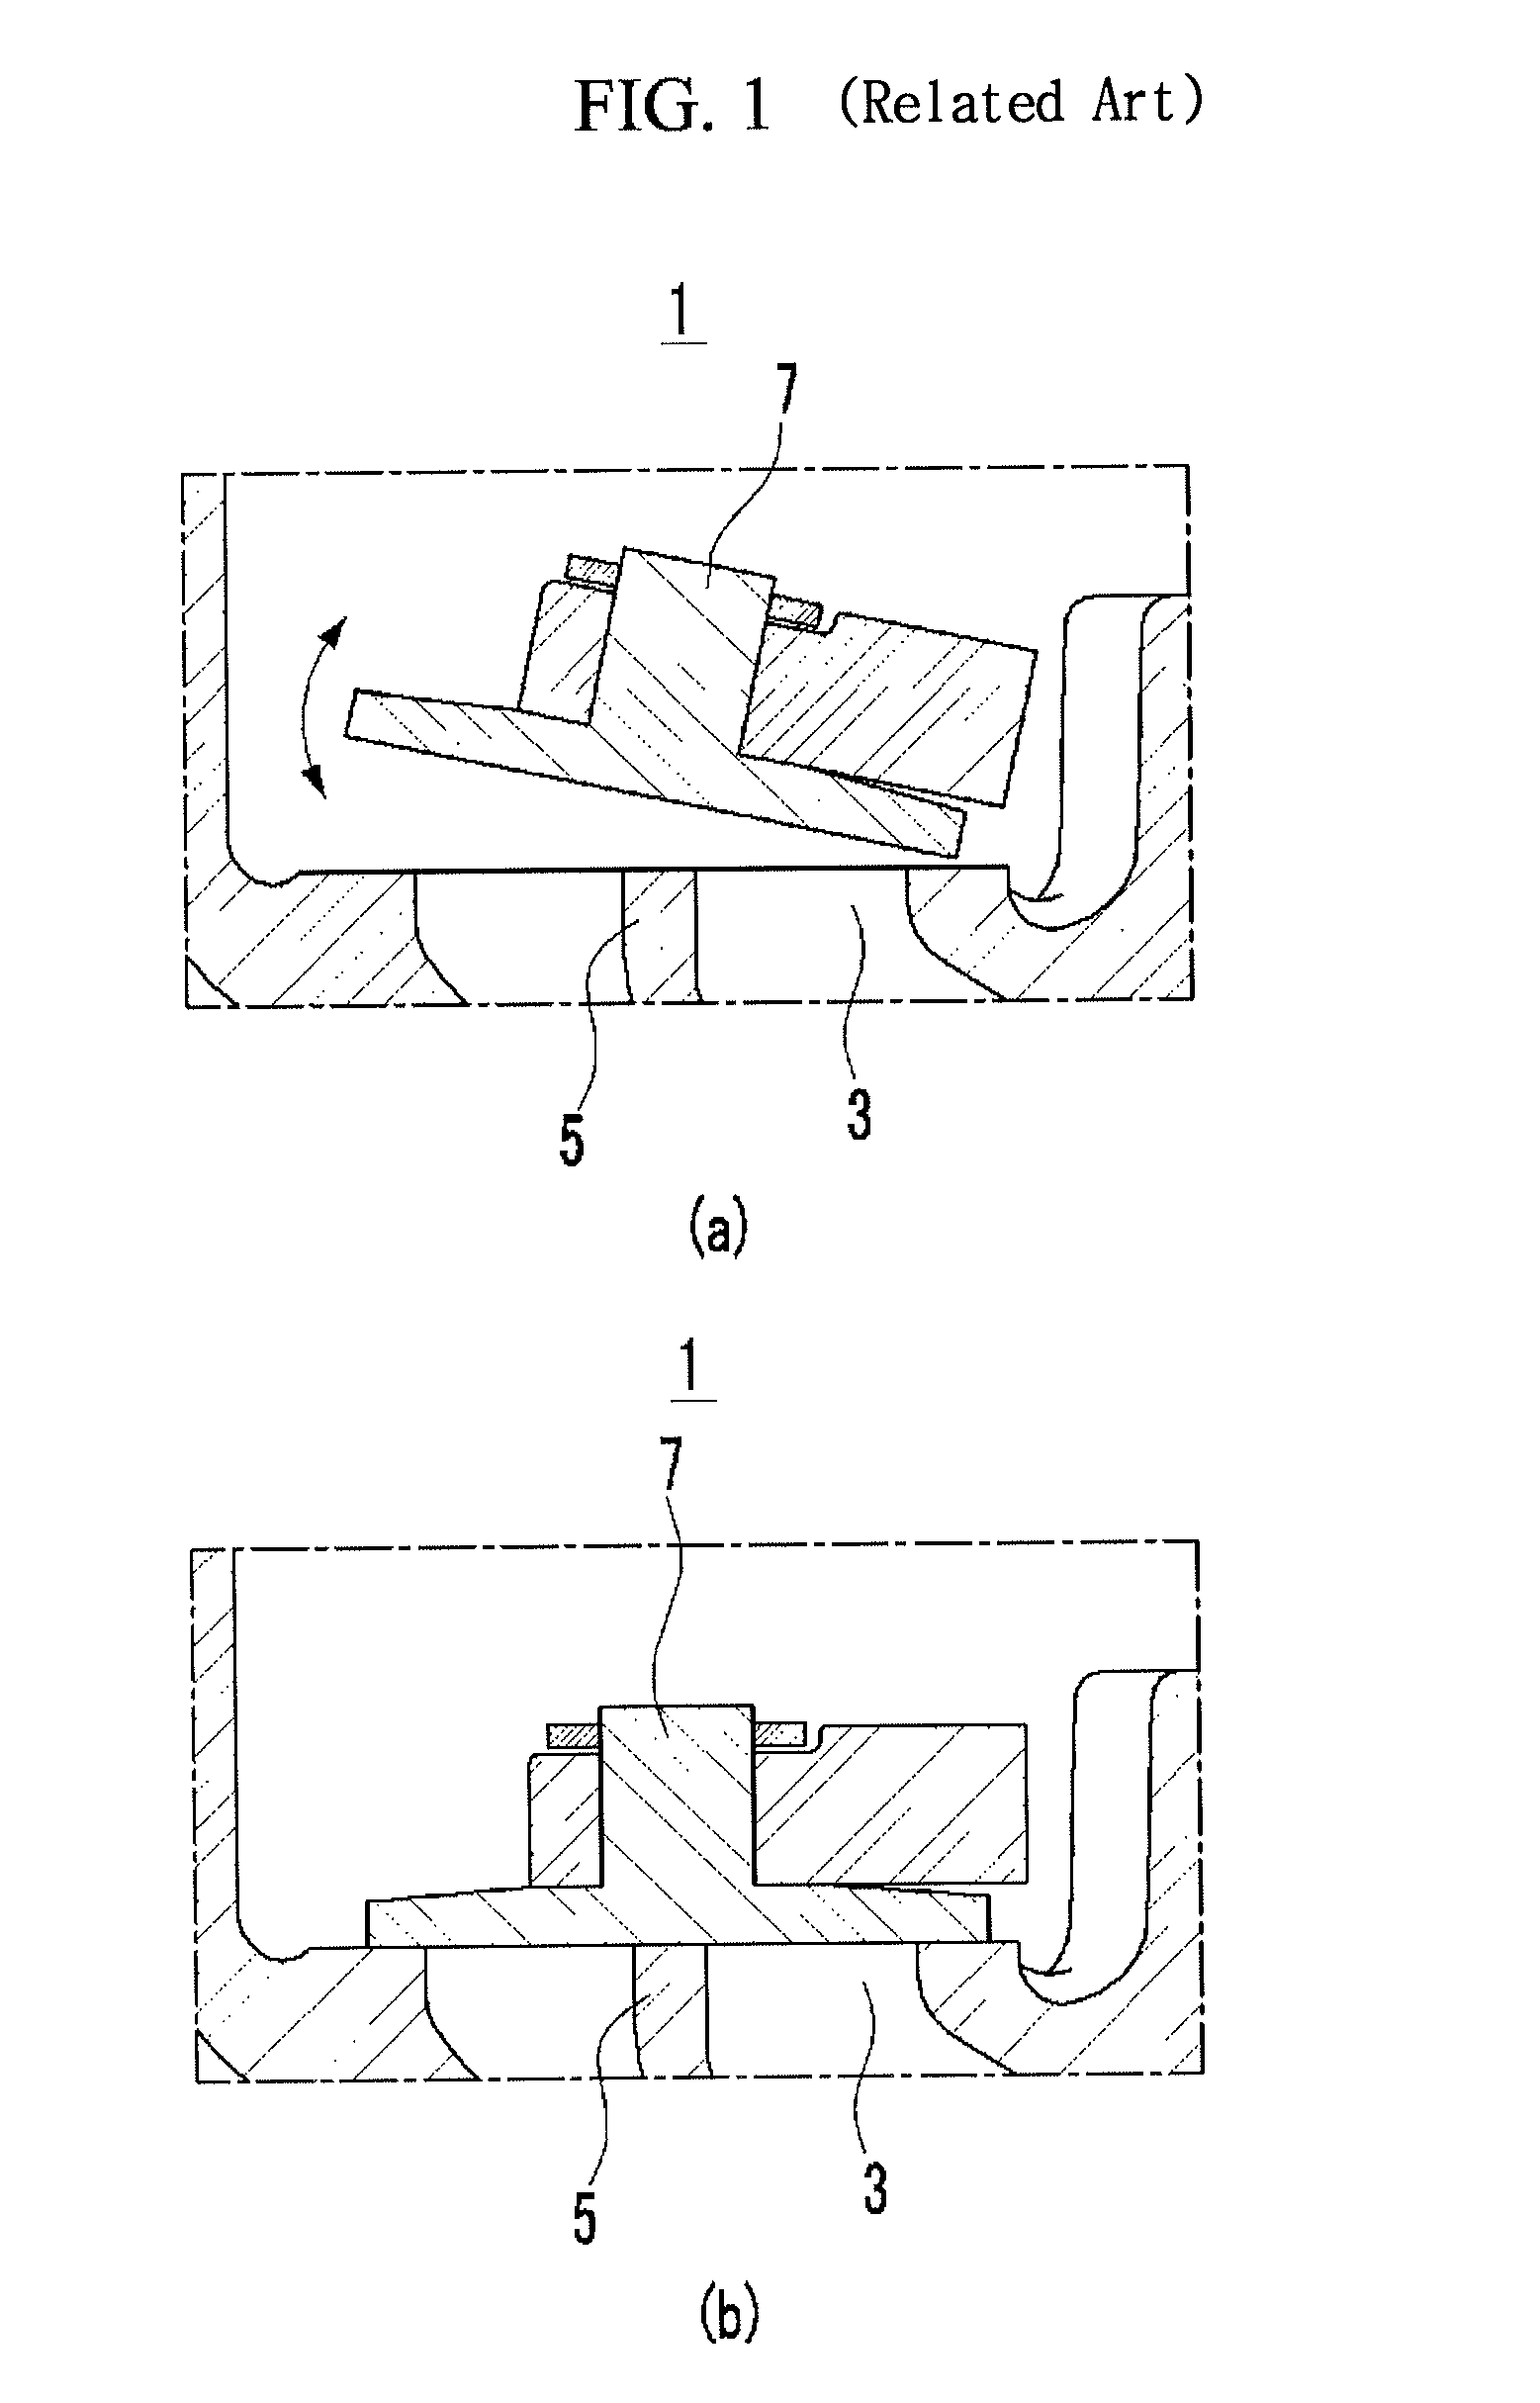 Waste gate assembly for turbocharger